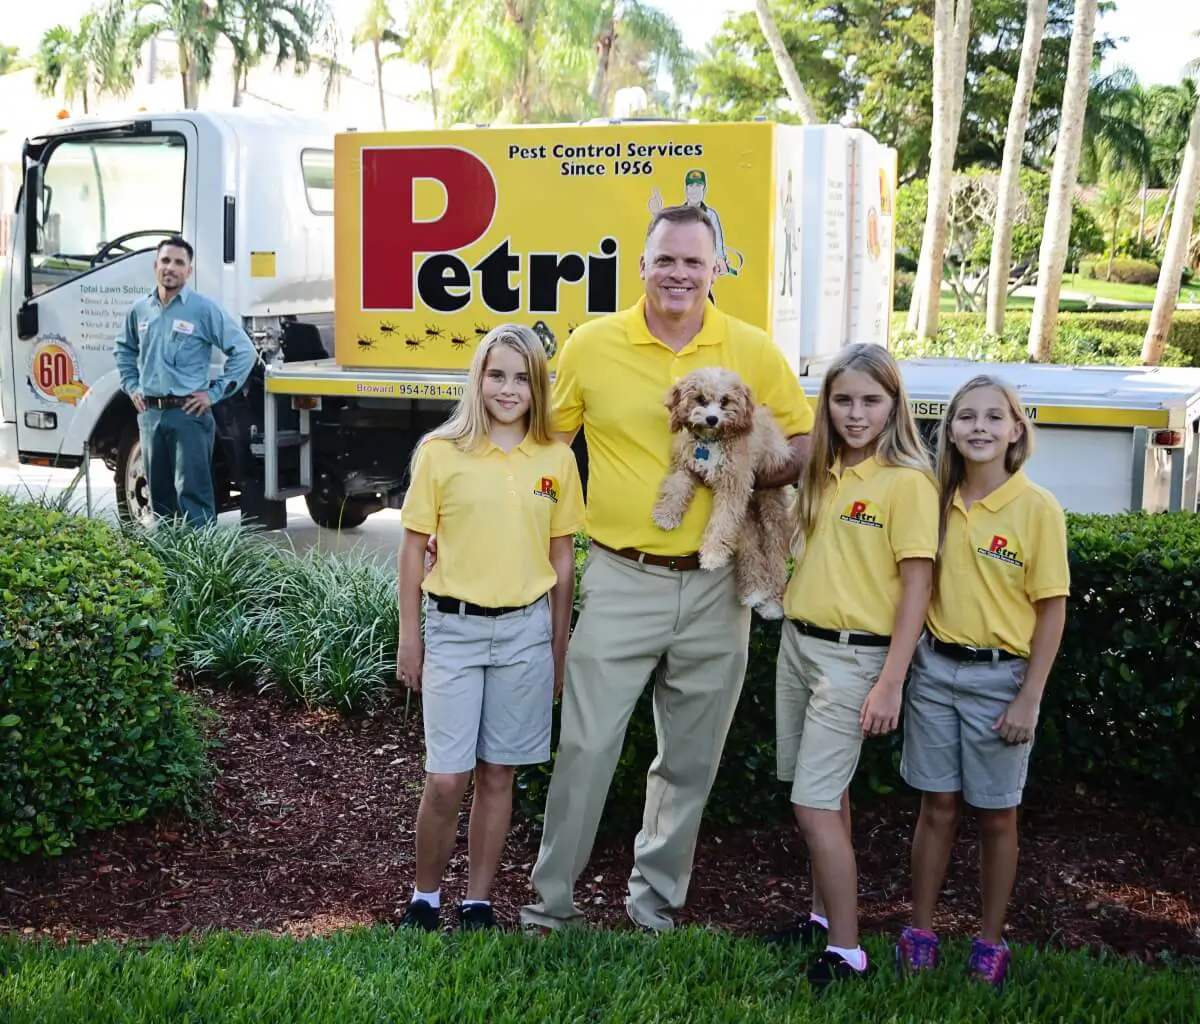 Friendly pest control service by Petri Pest Control in South Florida